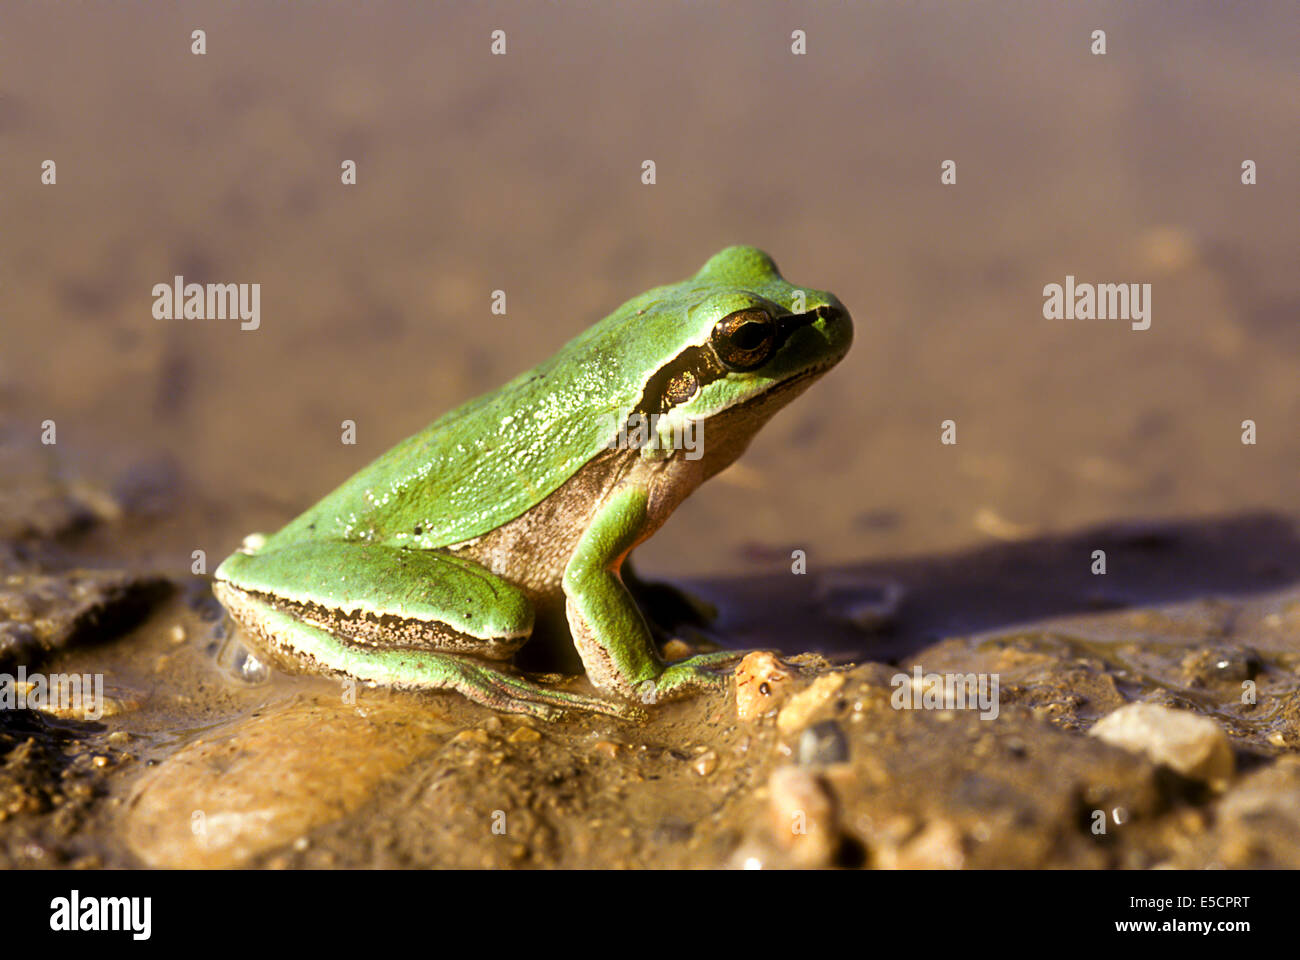 European tree frog (Hyla arborea) near water Photographed in Israel in December Stock Photo